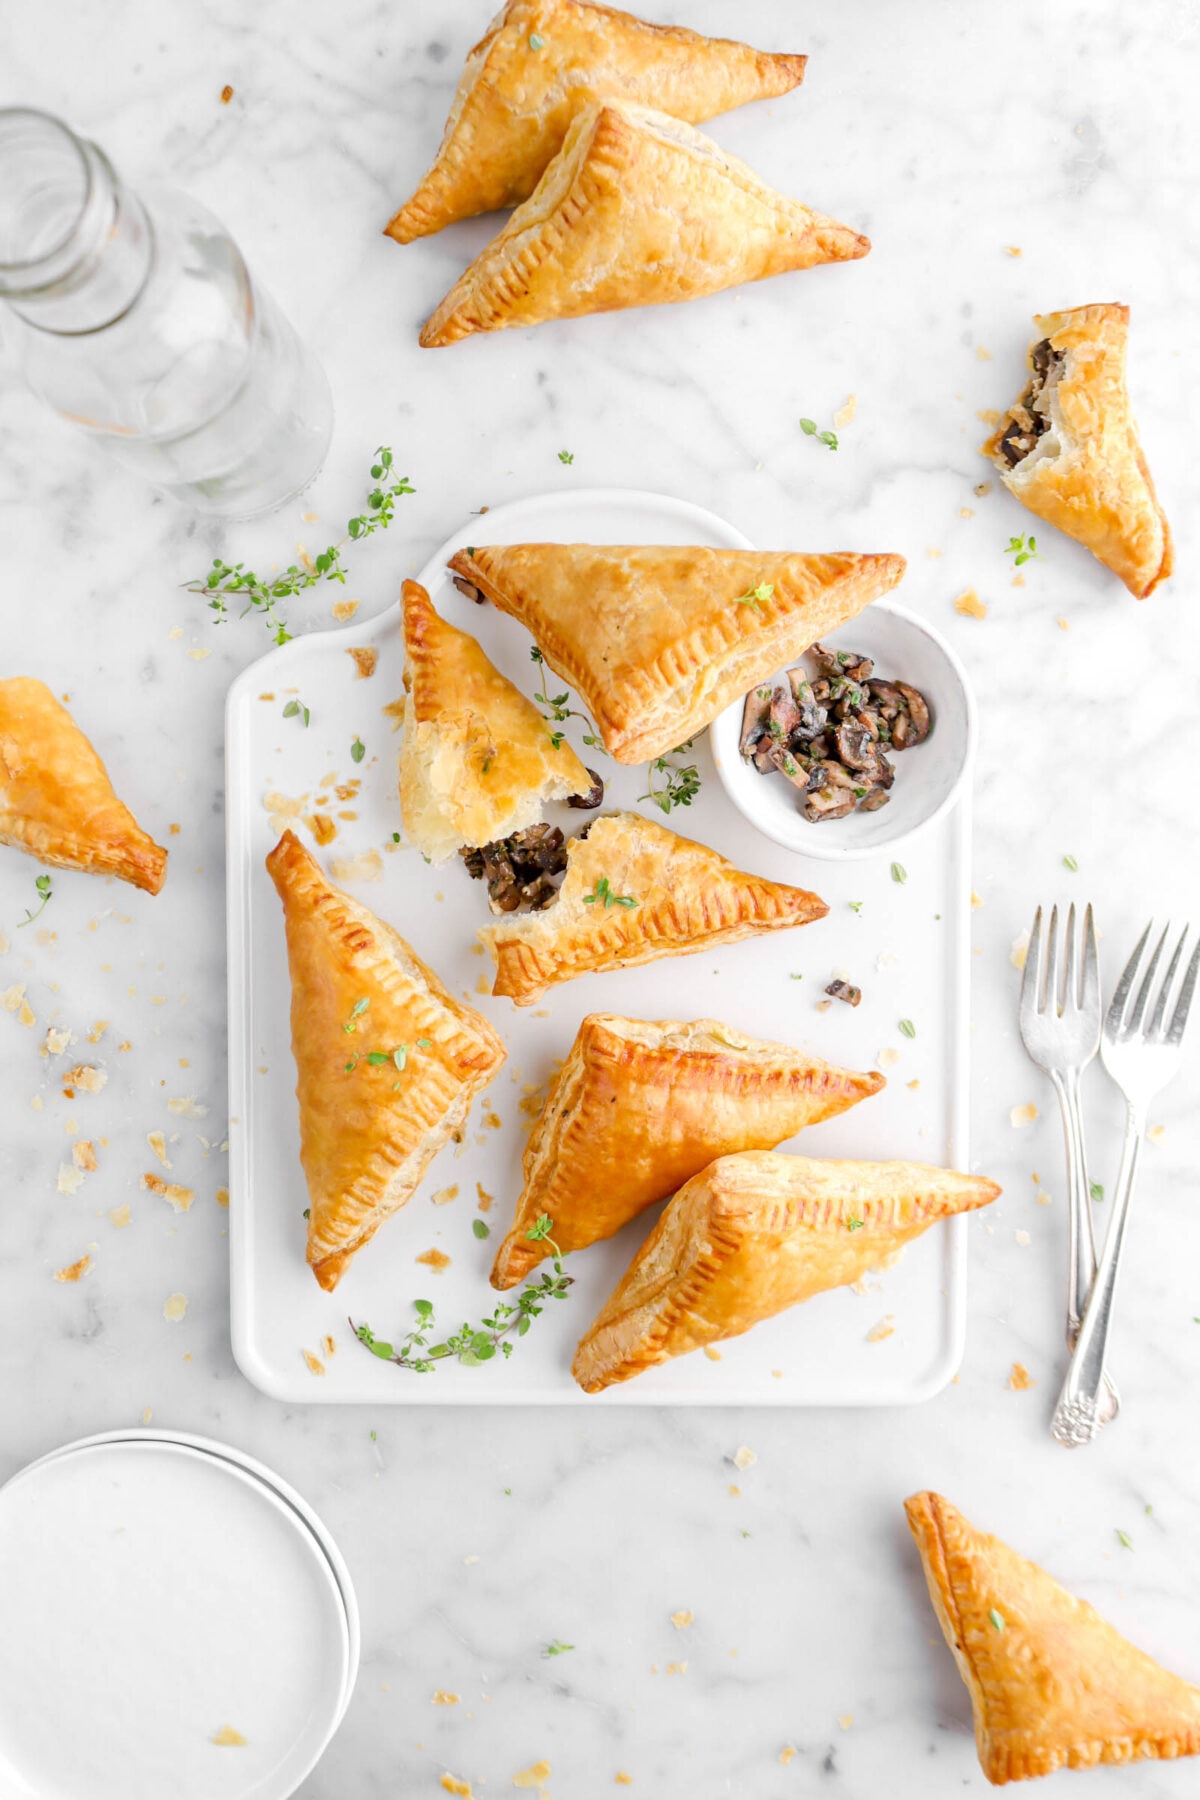 turnovers on white tray with bowl of mushrooms and thyme sprigs, more turnovers around on marble surface, with plates and forks beside